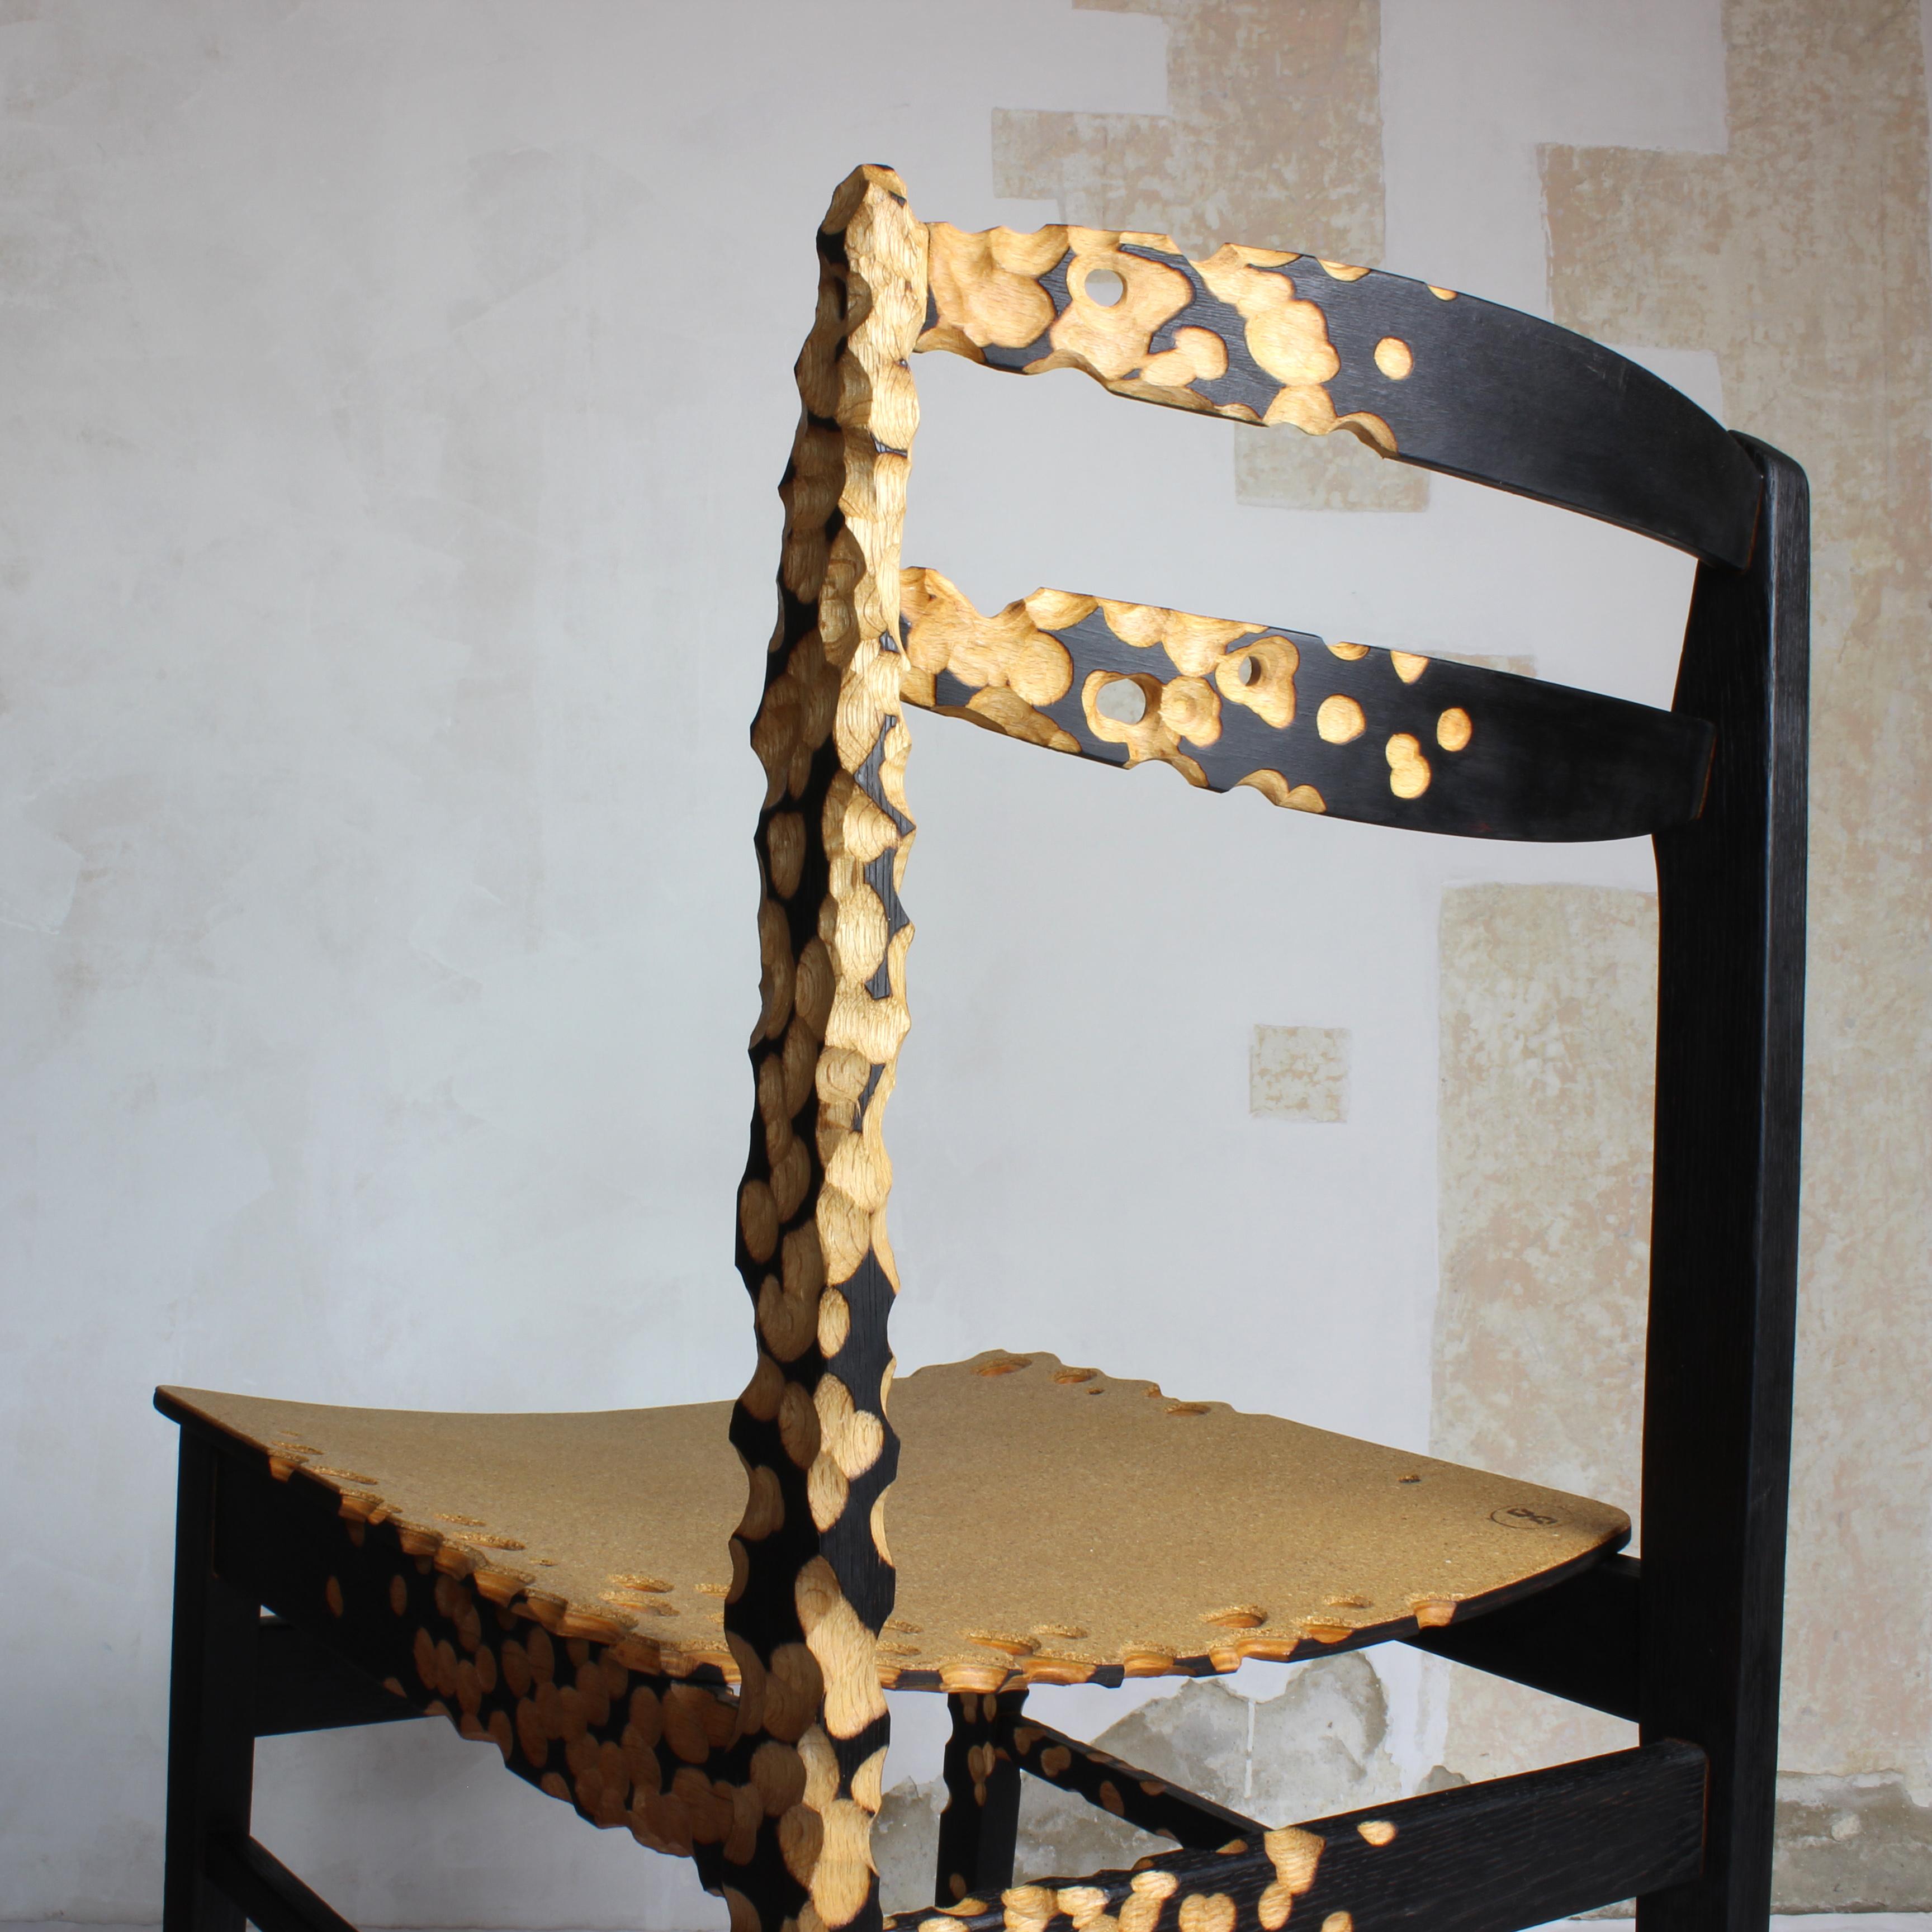 N1 Chair, Unique Sculptured, Charred Furniture, from Salvaged Chair and Cork For Sale 2